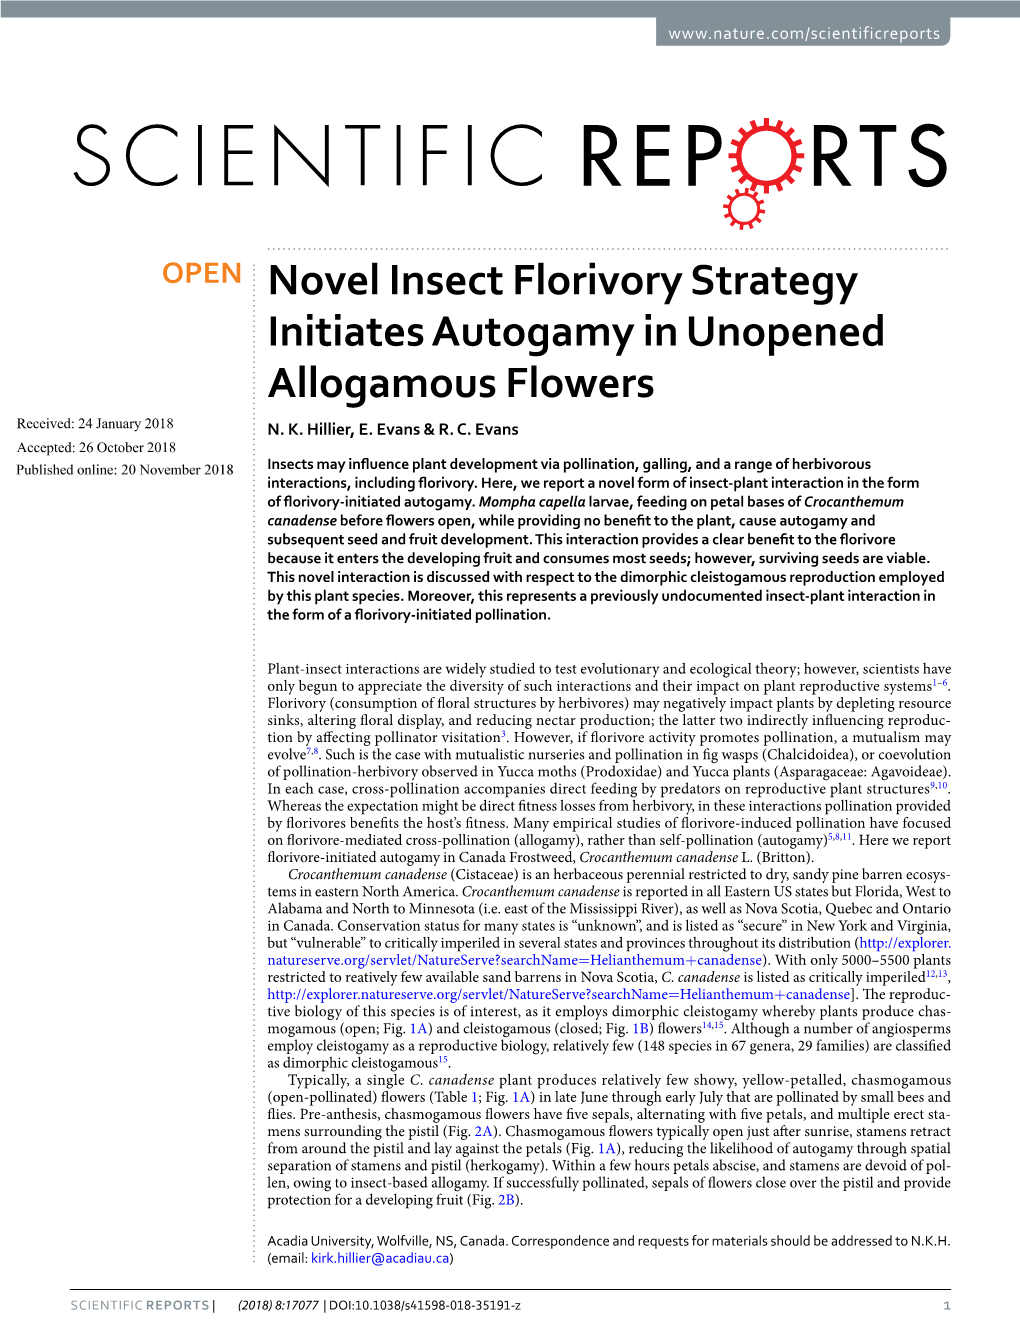 Novel Insect Florivory Strategy Initiates Autogamy in Unopened Allogamous Flowers Received: 24 January 2018 N